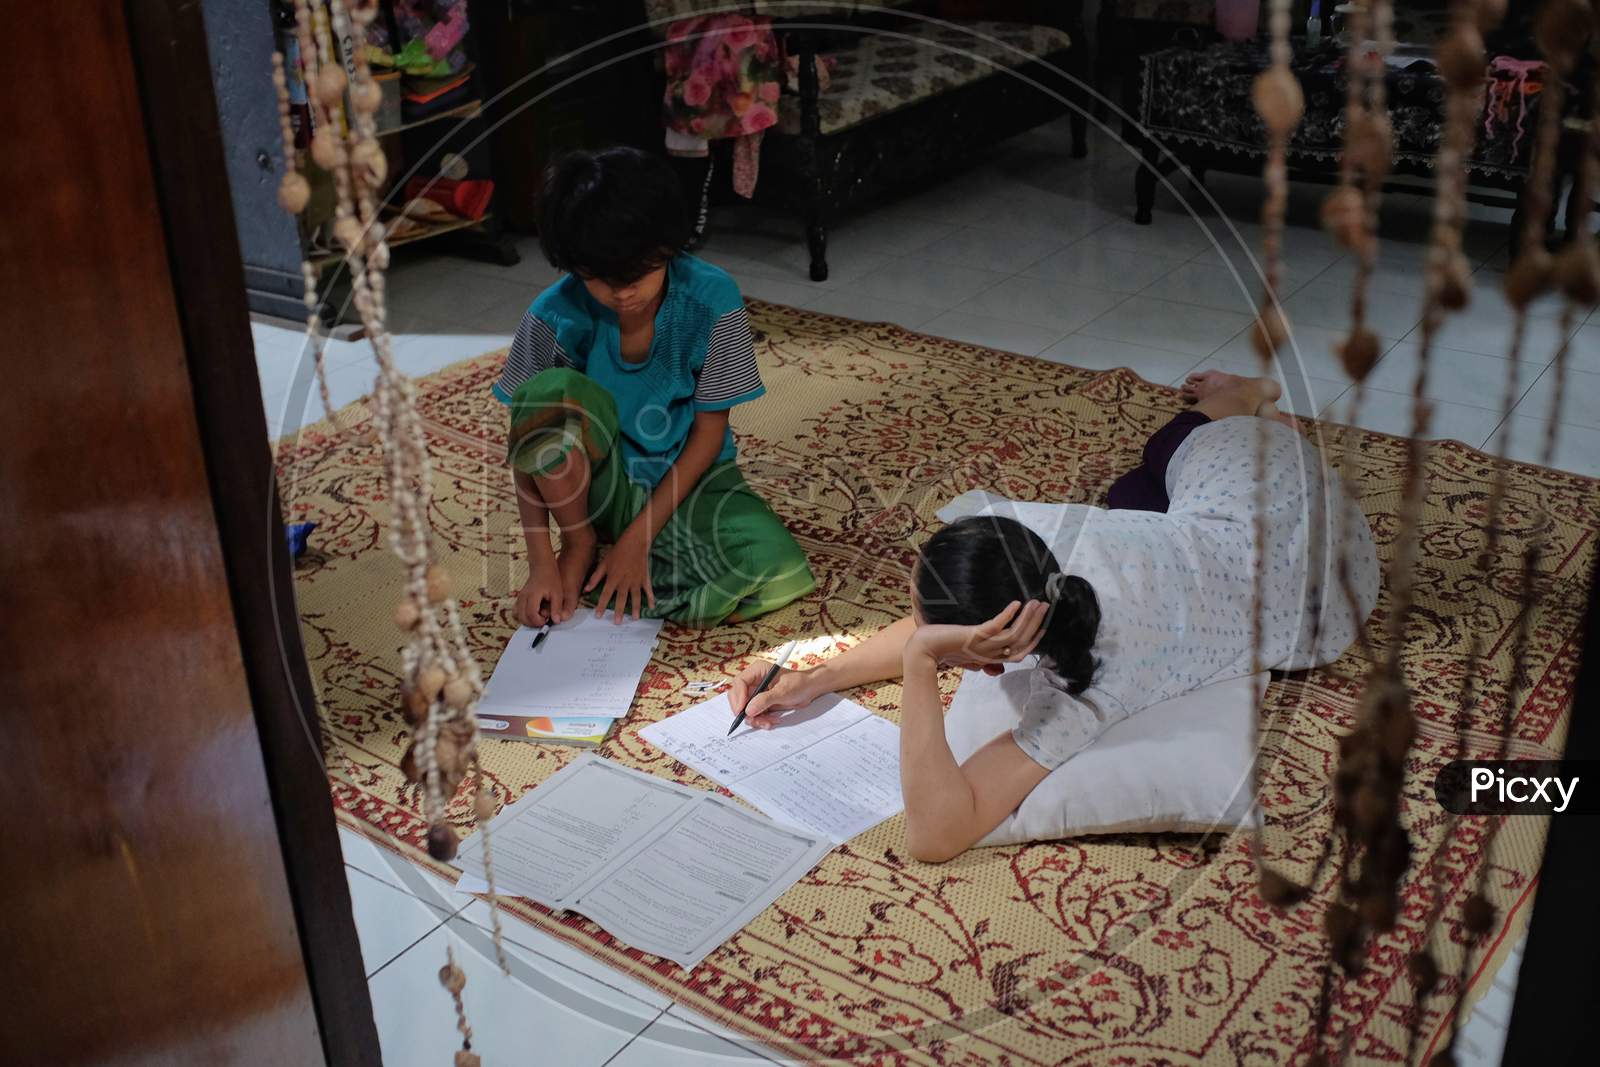 A mother accompanies her child to study at home